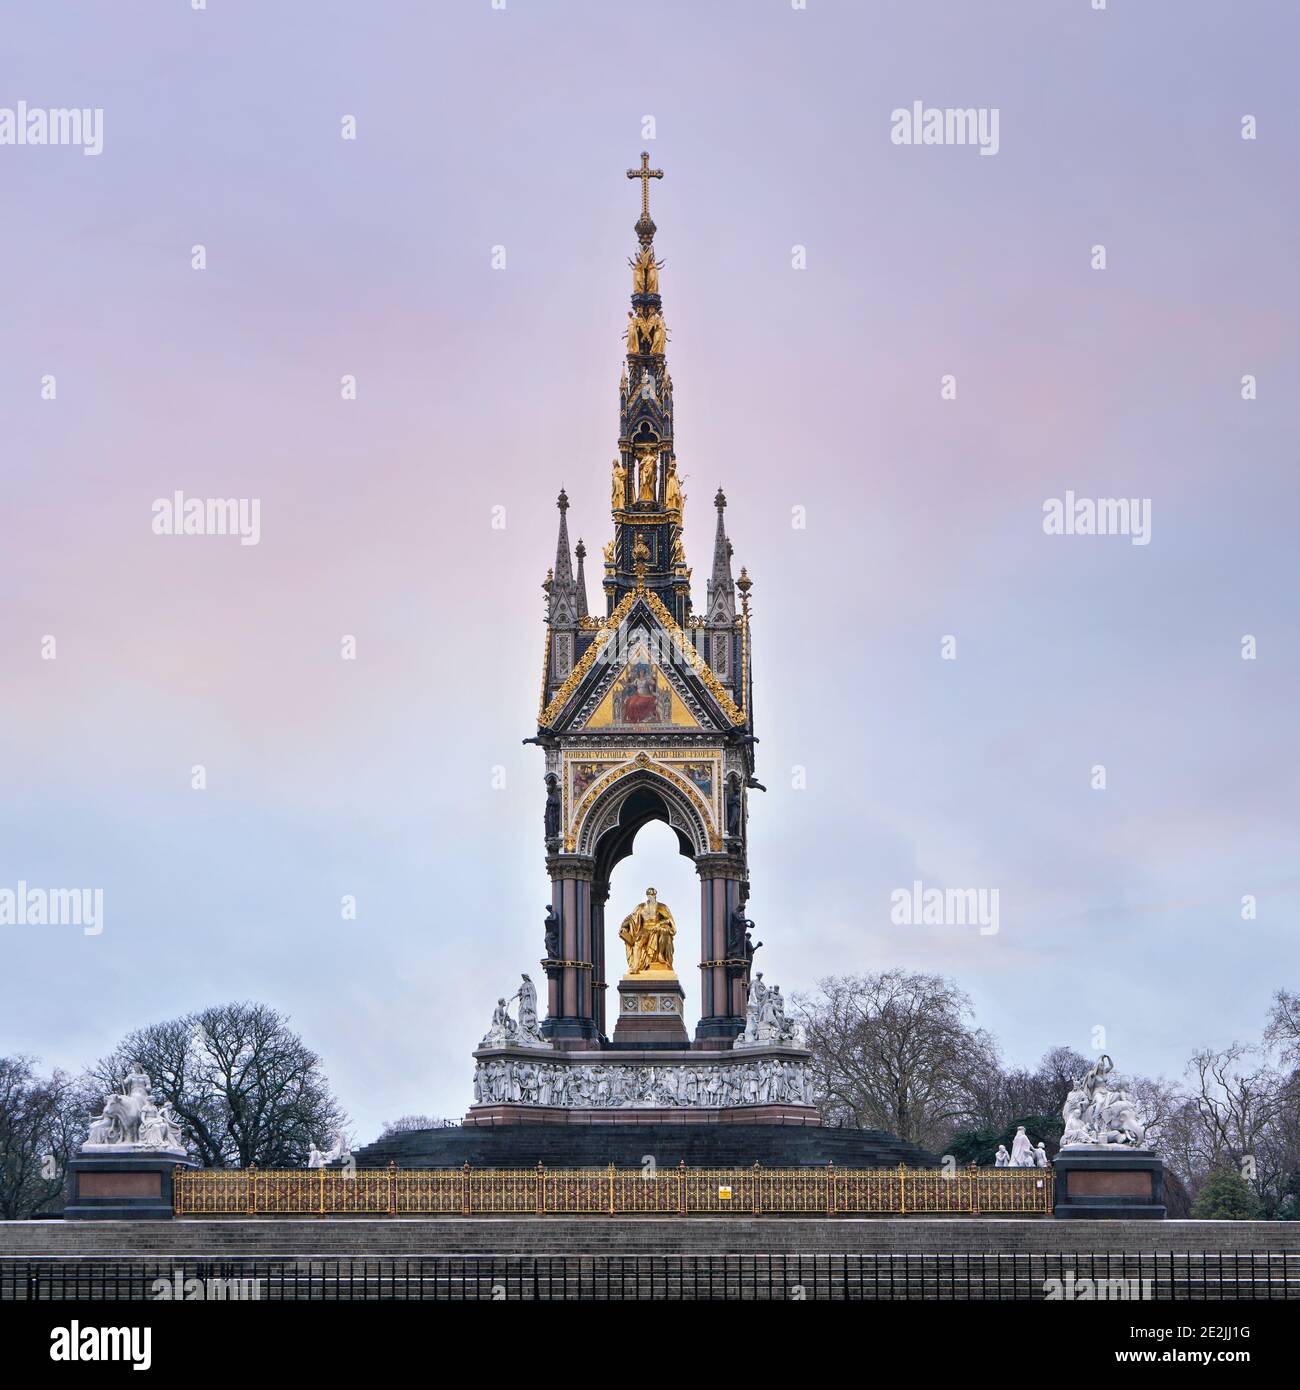 Albert Memorial with golden prince statute (opened in 1872) in Kensington, London, clear cold winter afternoon sky in background Stock Photo